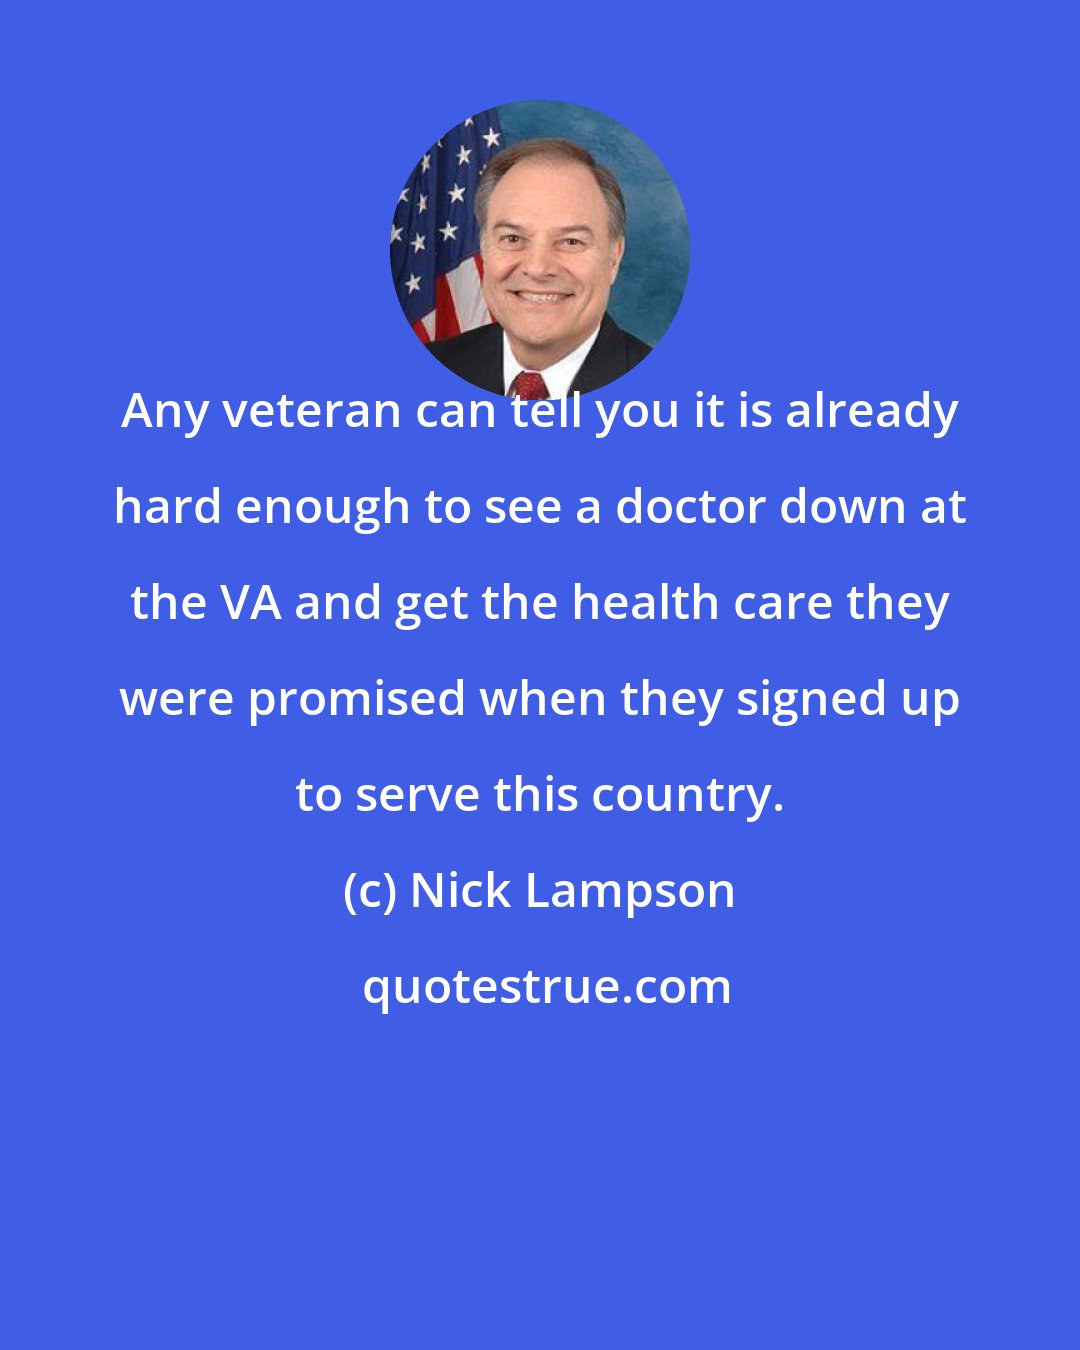 Nick Lampson: Any veteran can tell you it is already hard enough to see a doctor down at the VA and get the health care they were promised when they signed up to serve this country.